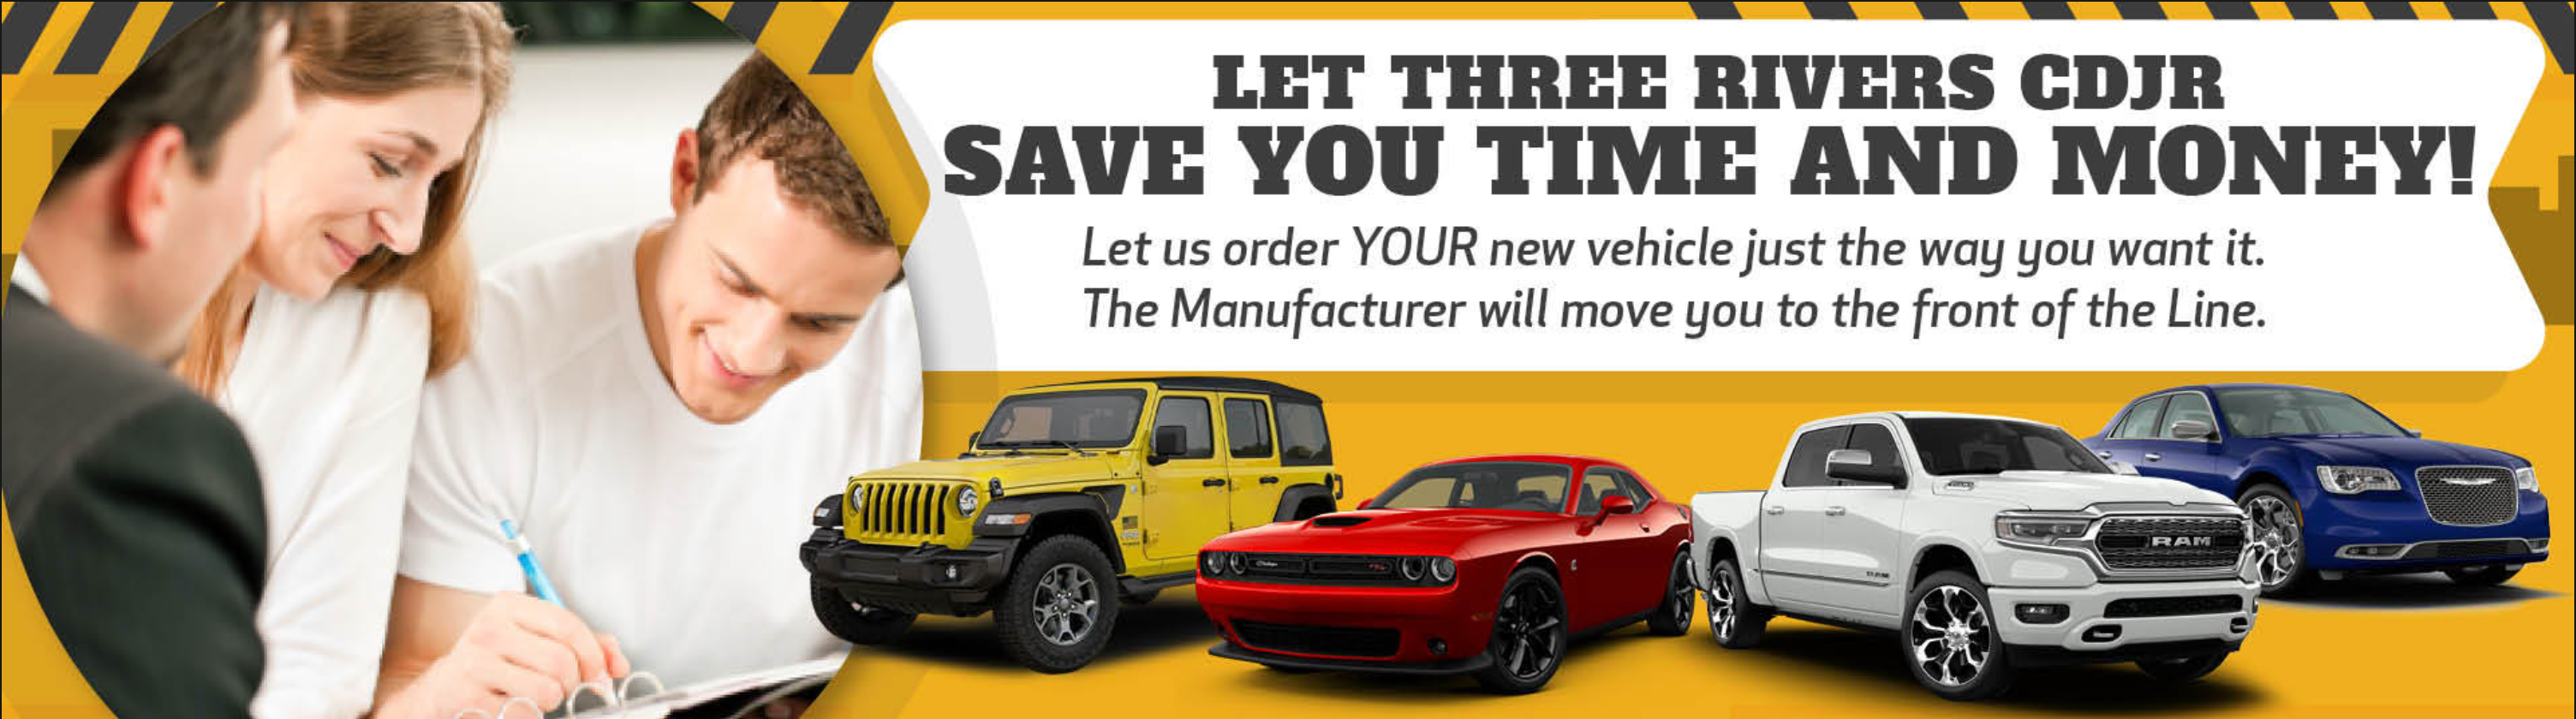 Let Three Rivers CDJR save you Time and Money! Let us order YOUR new vehicle just the way you want it. The Manufacturer will move you to the front of the Line.